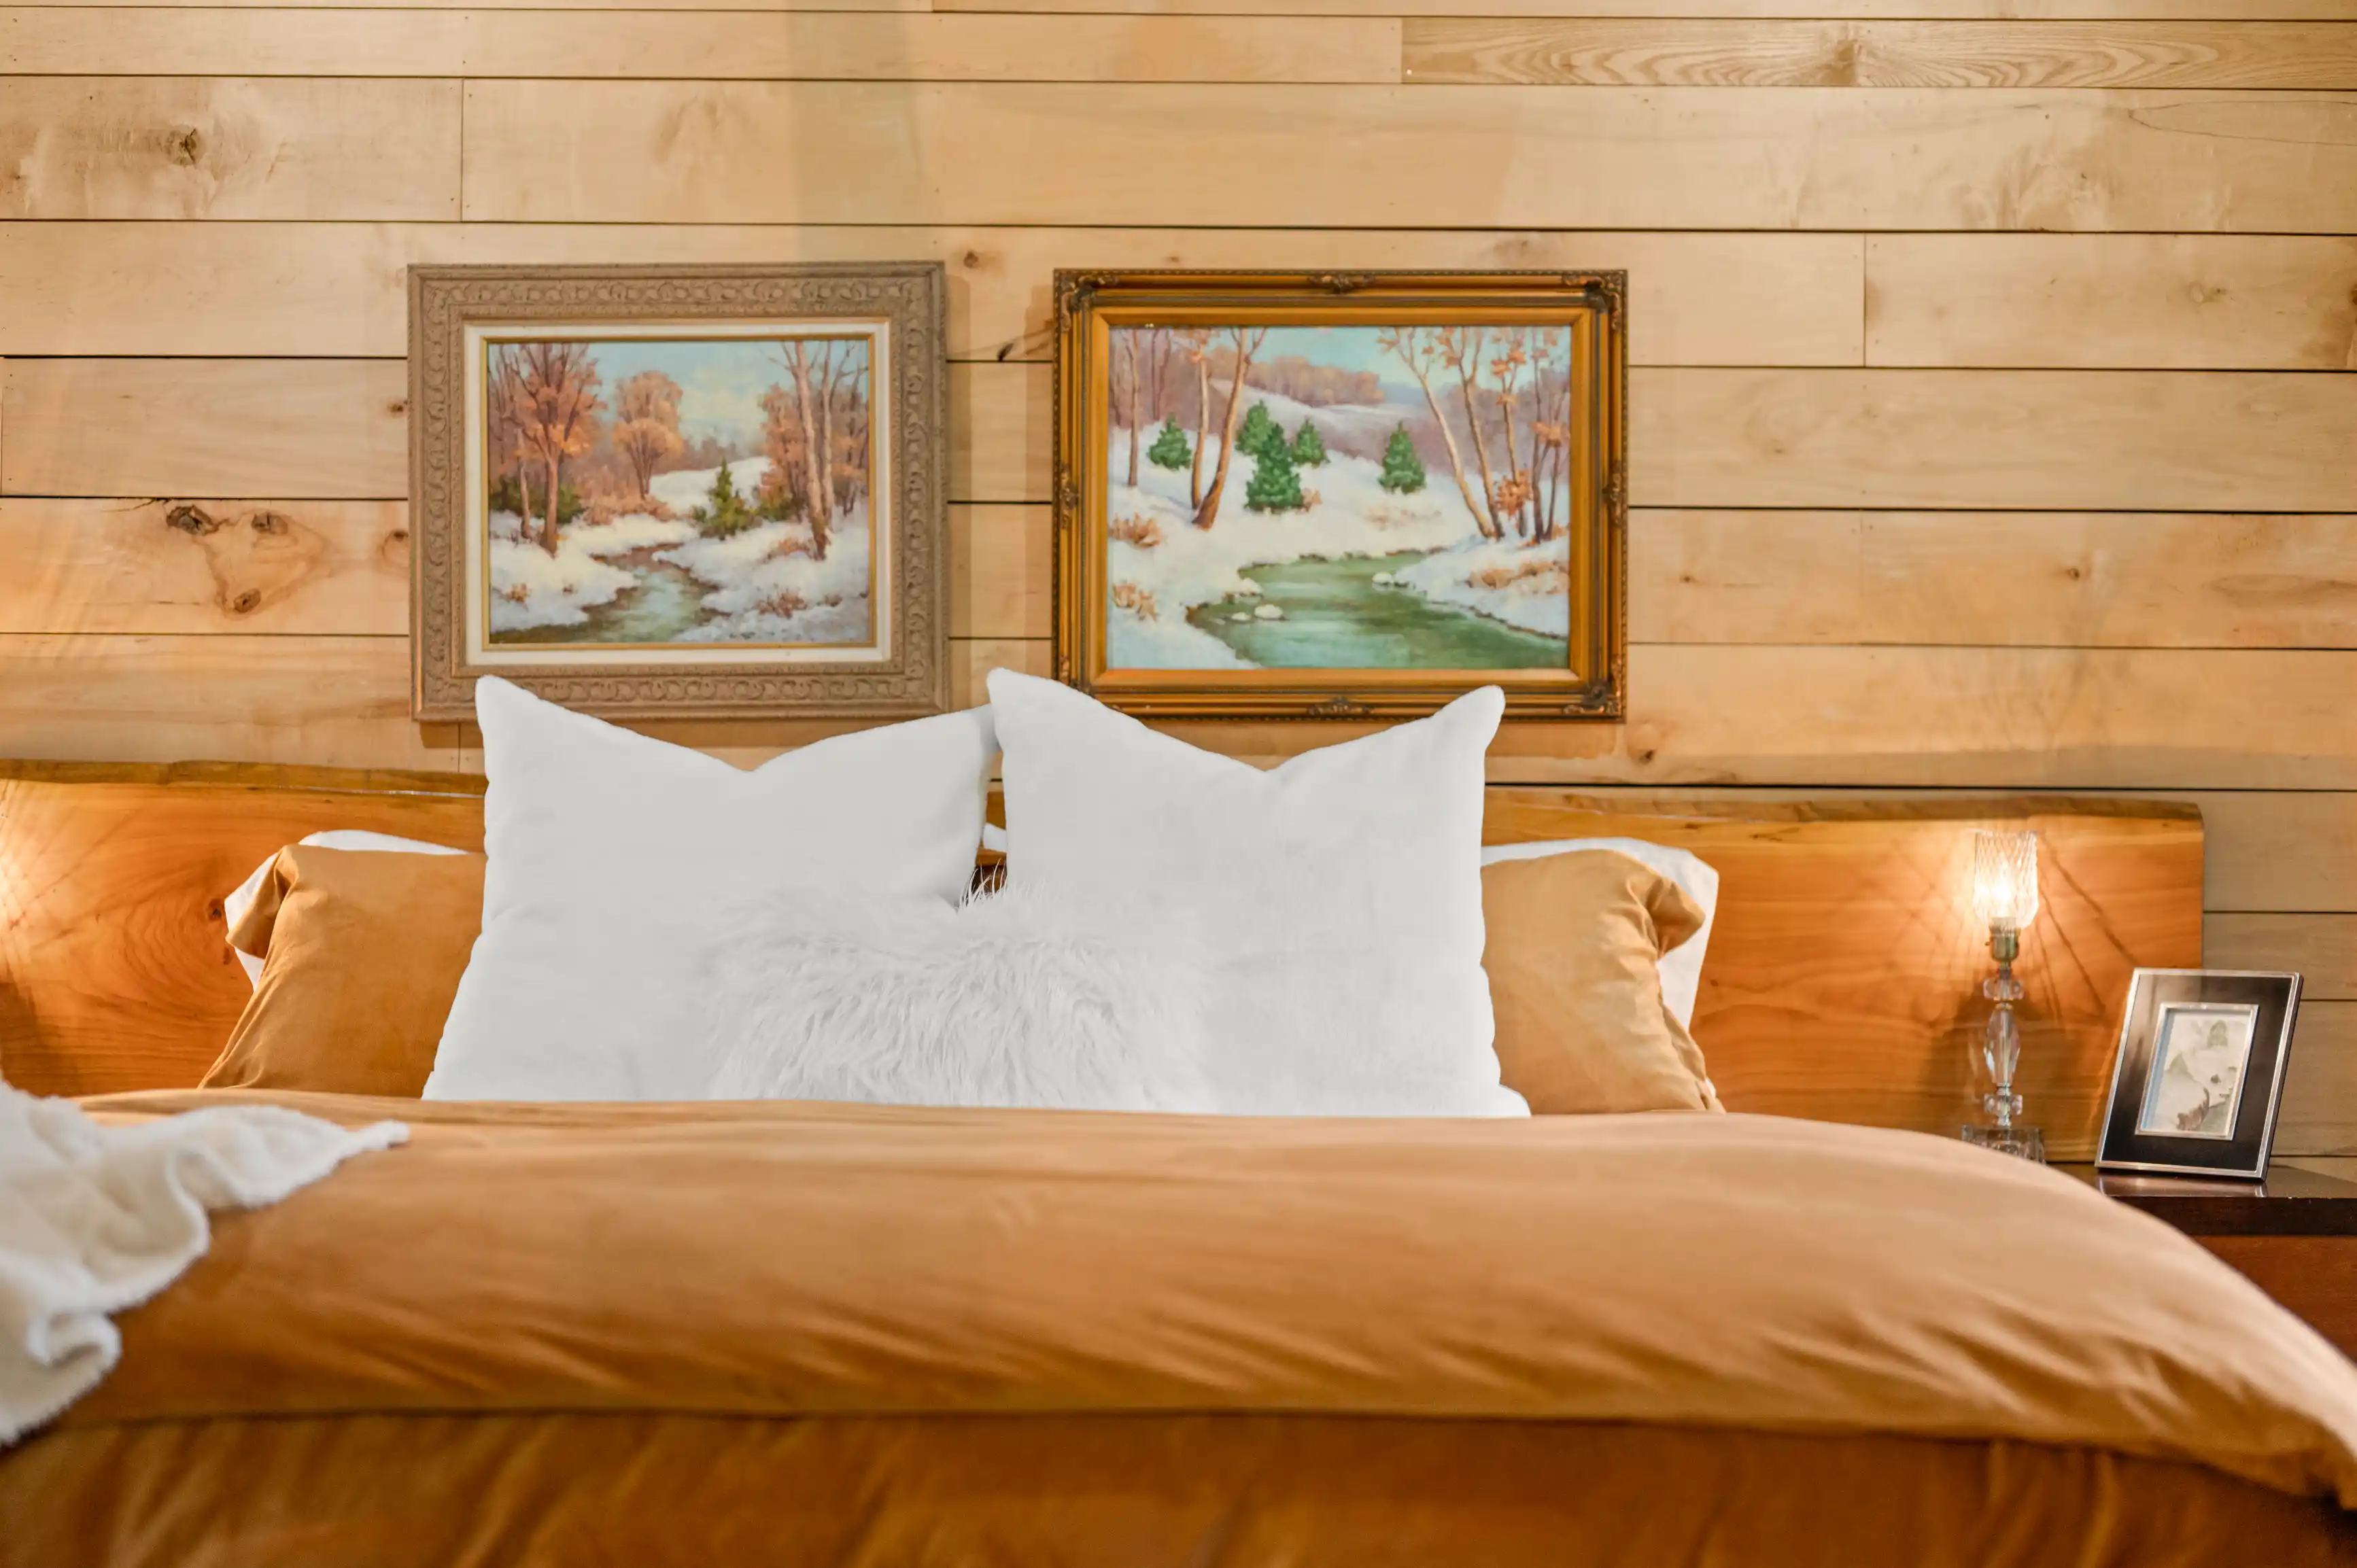 A cozy bedroom with a wooden headboard, warm-toned bedding, white fluffy pillows, and two framed landscape paintings above the bed.